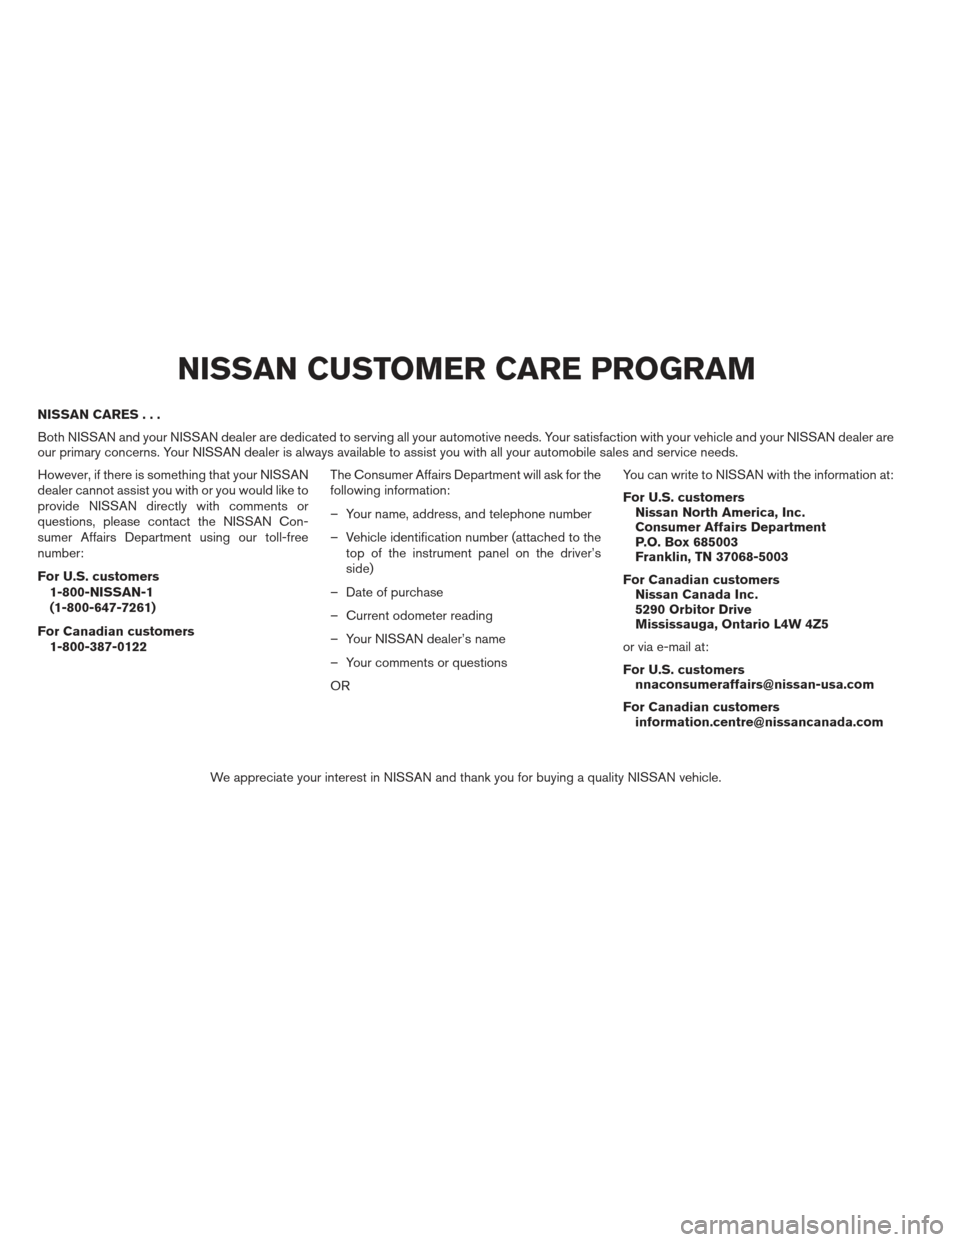 NISSAN VERSA HATCHBACK 2012 1.G Owners Manual NISSAN CARES...
Both NISSAN and your NISSAN dealer are dedicated to serving all your automotive needs. Your satisfaction with your vehicle and your NISSAN dealer are
our primary concerns. Your NISSAN 